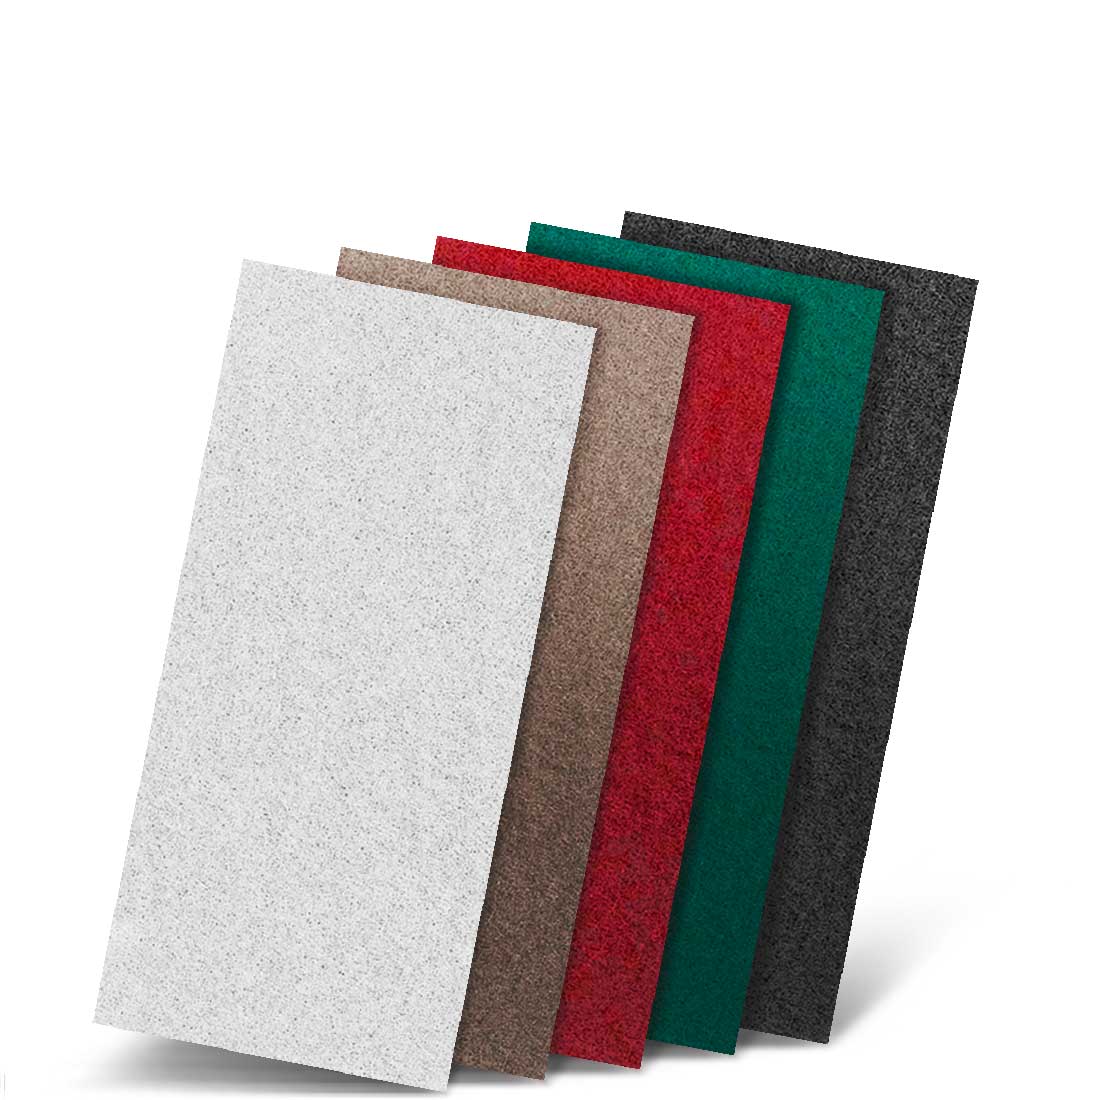 MENZER hand pads for hand sanders, 250 x 115 mm / polyester